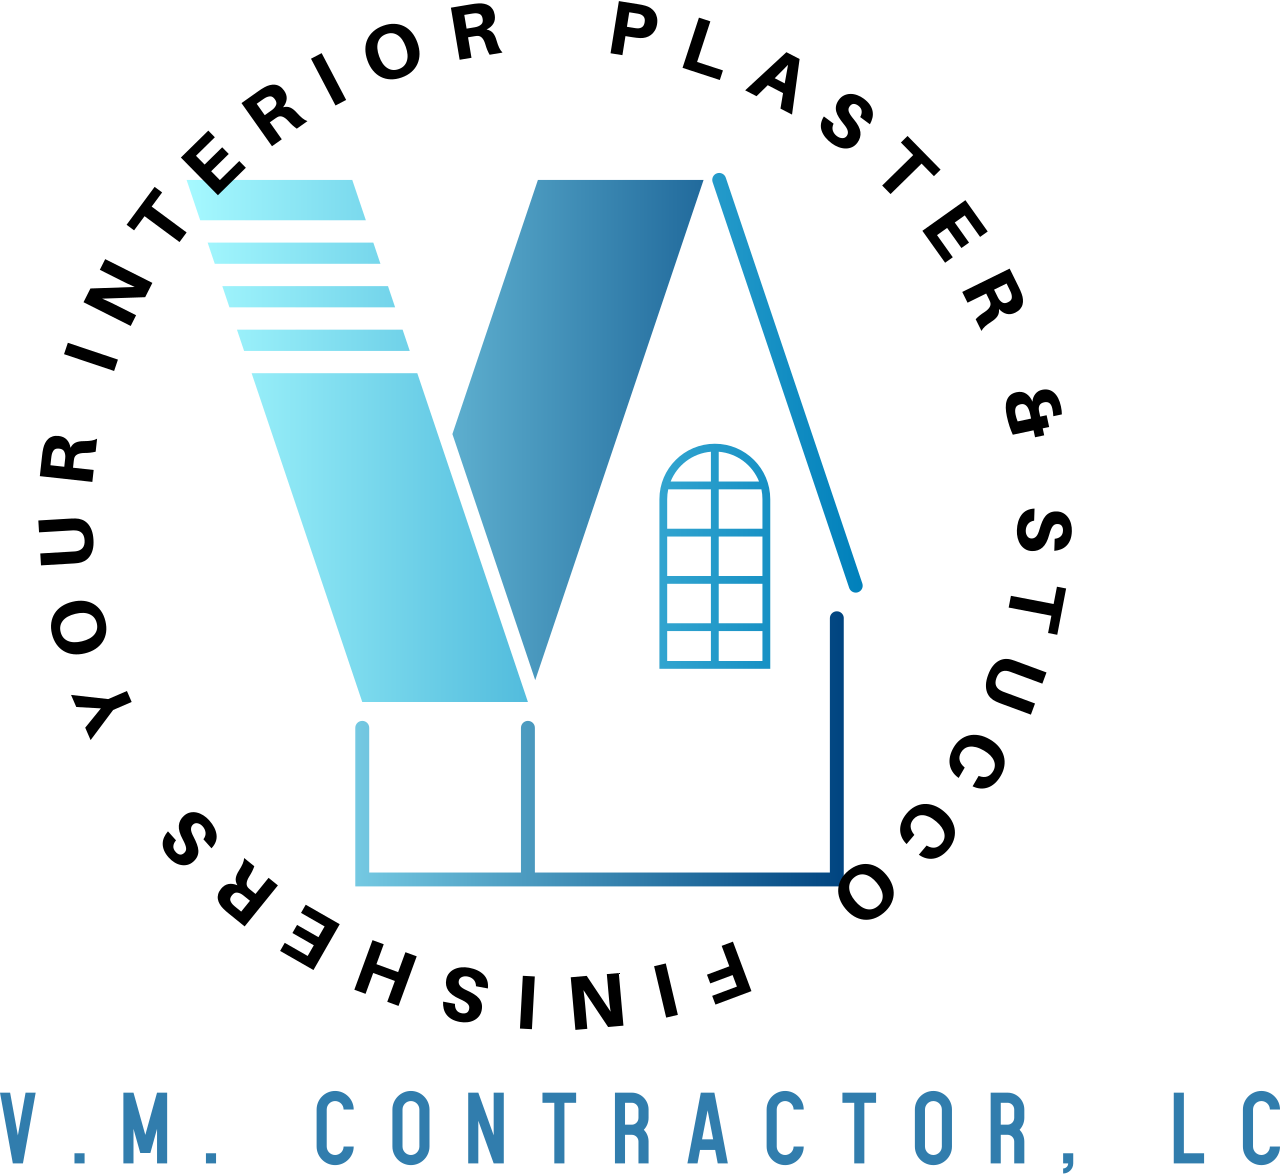 V.M. Contractor, LC's logo